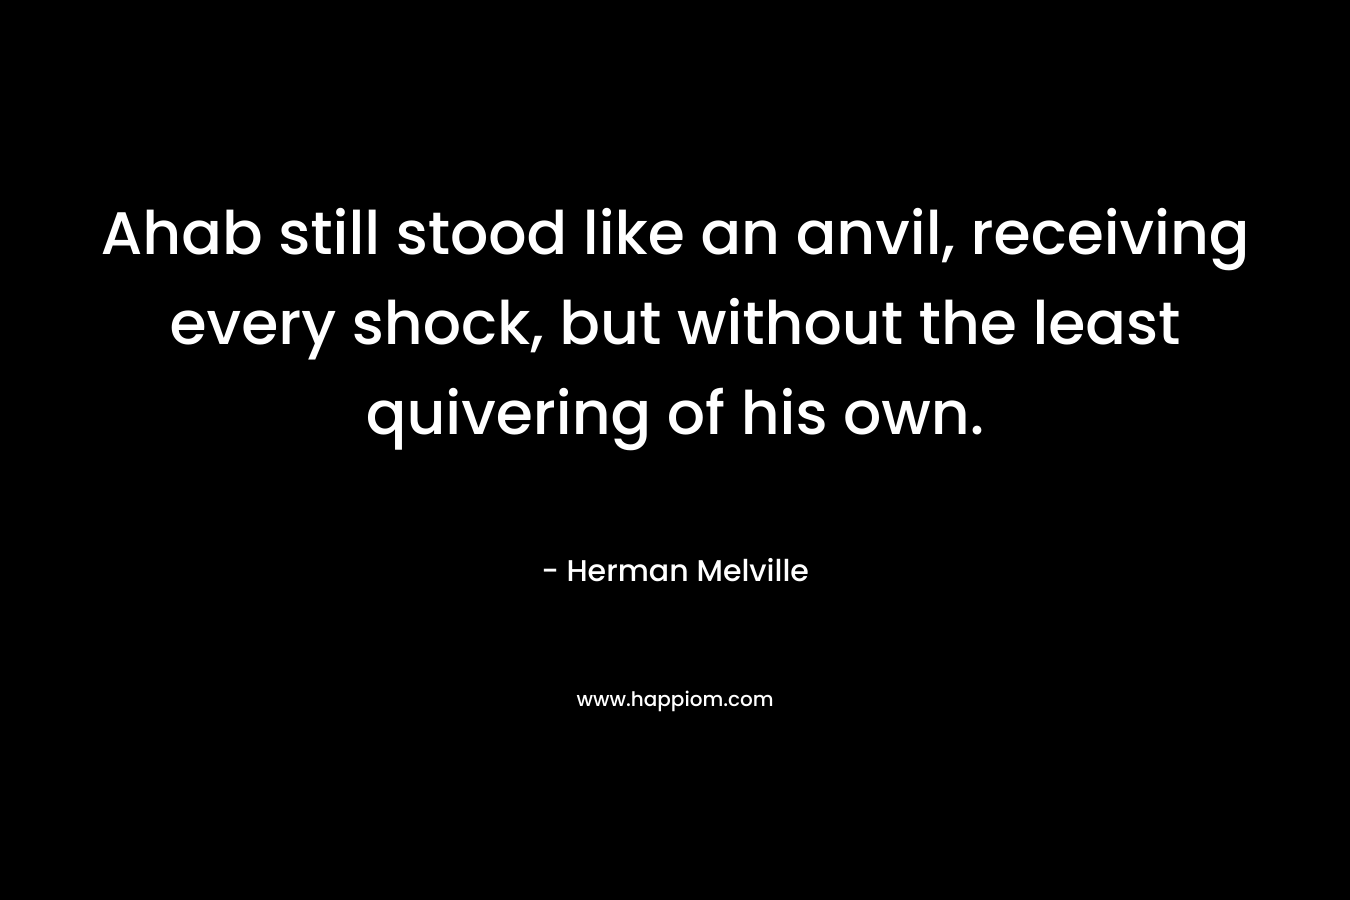 Ahab still stood like an anvil, receiving every shock, but without the least quivering of his own. – Herman Melville